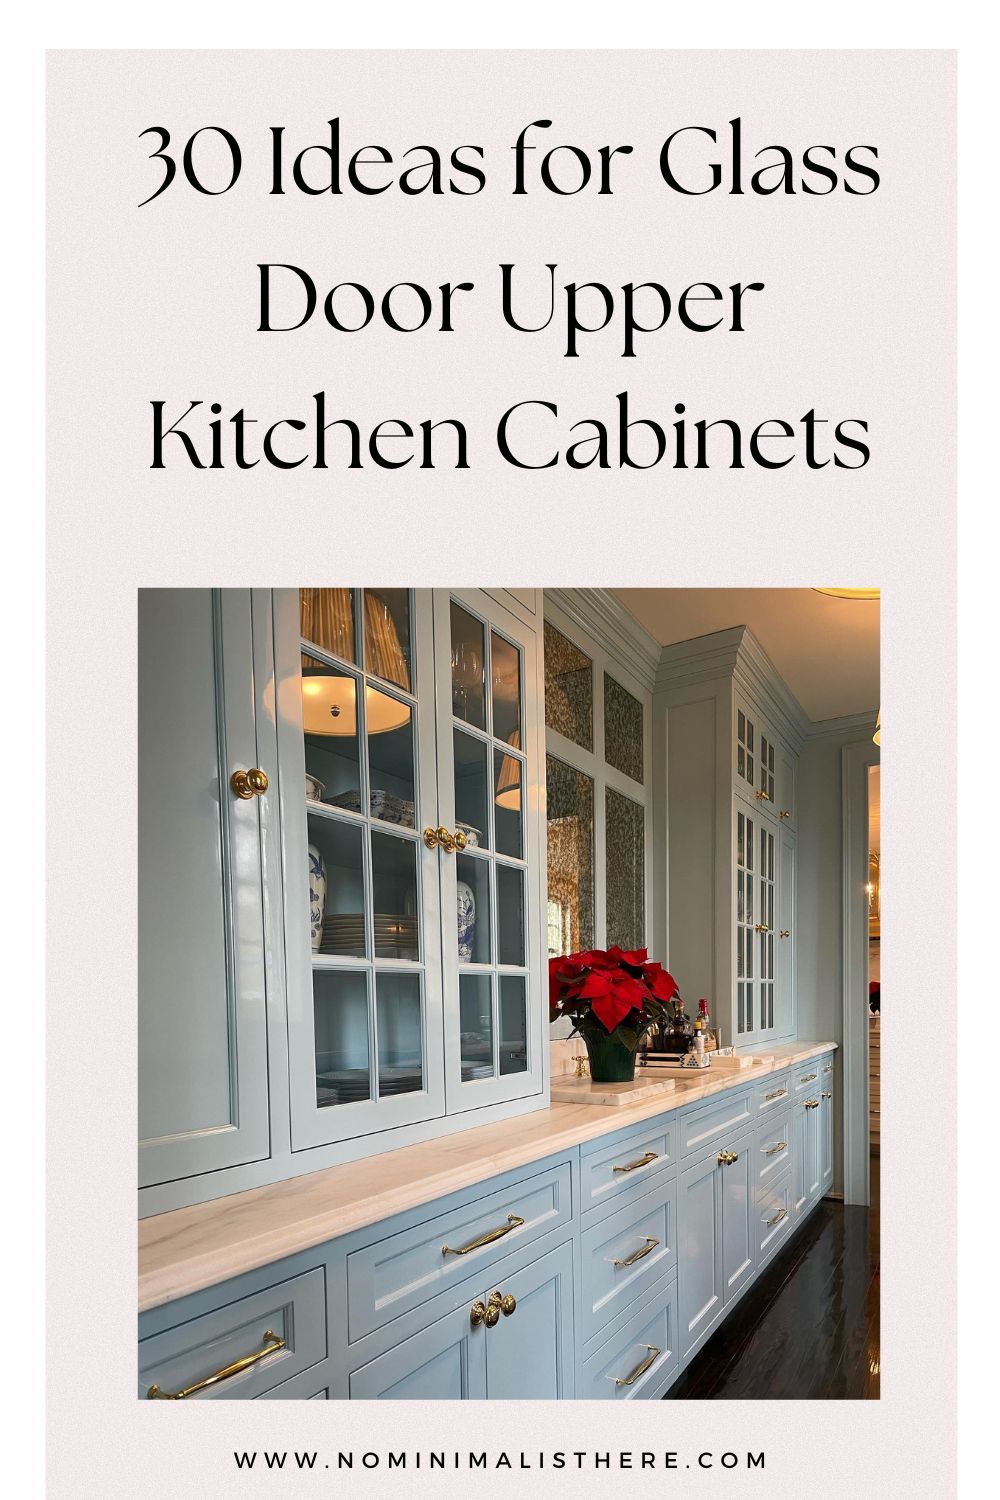 pinterest image for an article about  glass door upper kitchen cabinets